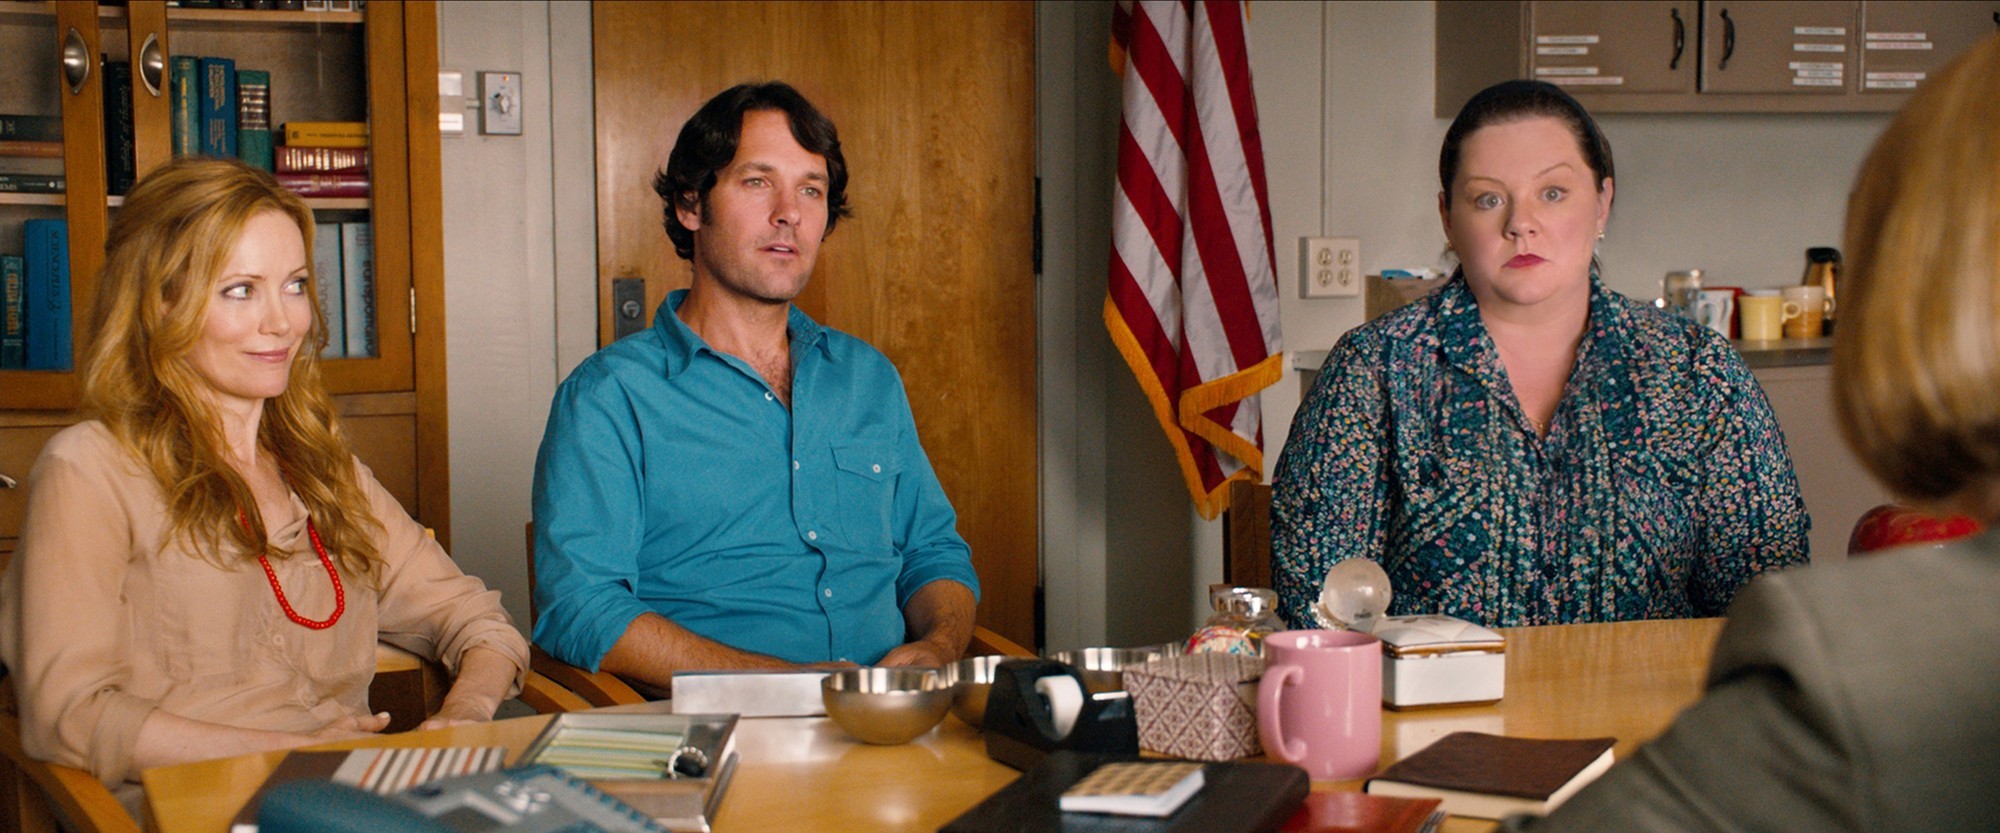 Leslie Mann, Paul Rudd and Melissa McCarthy in Universal Pictures' This Is 40 (2012)